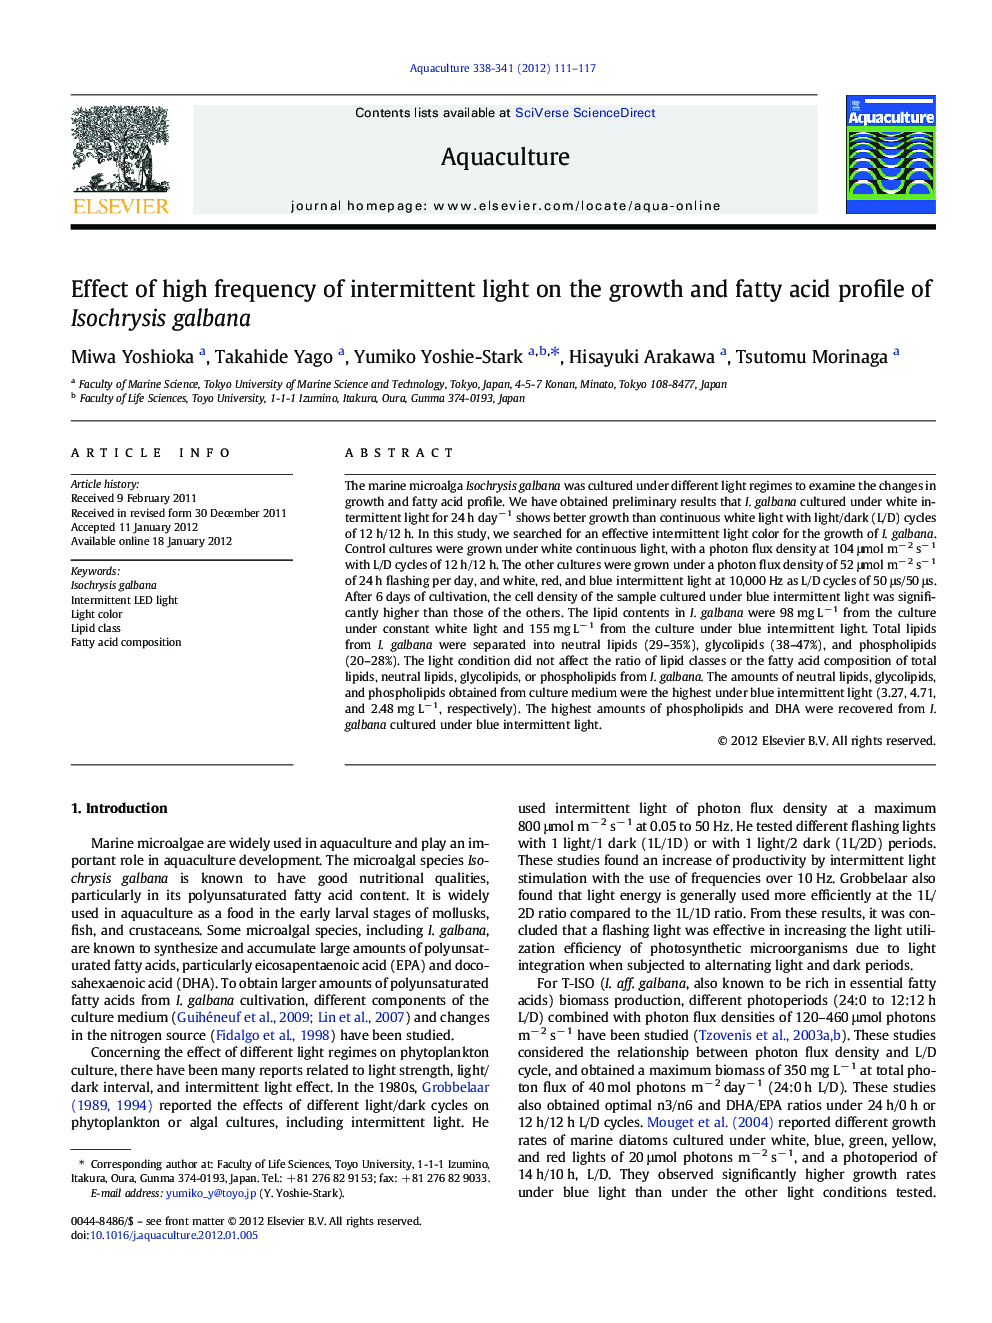 Effect of high frequency of intermittent light on the growth and fatty acid profile of Isochrysis galbana